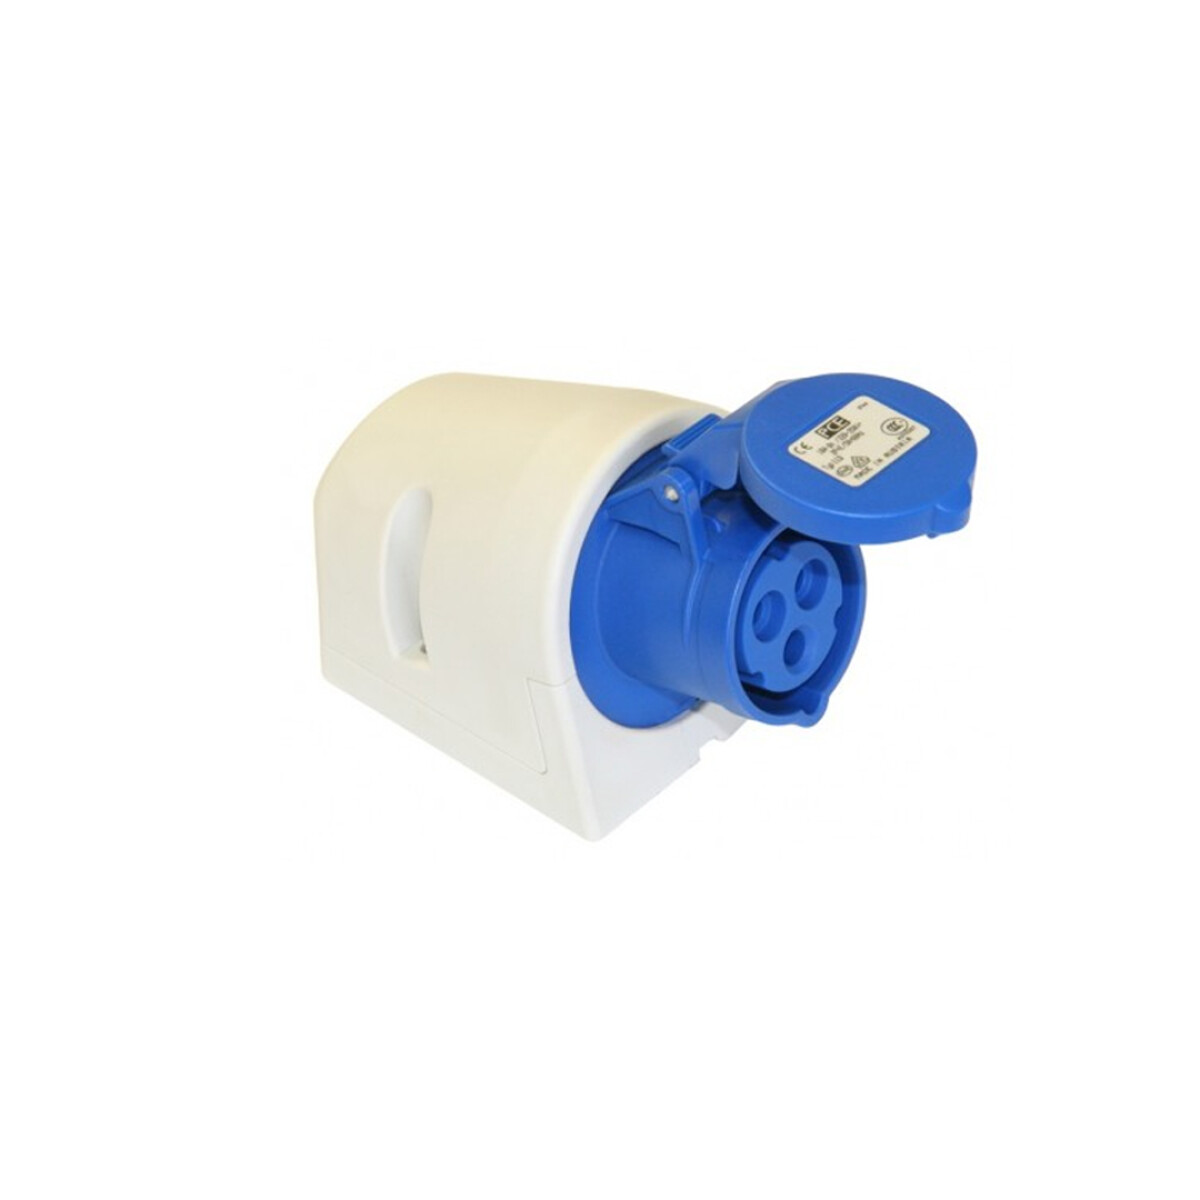 PCE Toma Pared - IP-67 220/240V H6 azul 32A 2P+T 